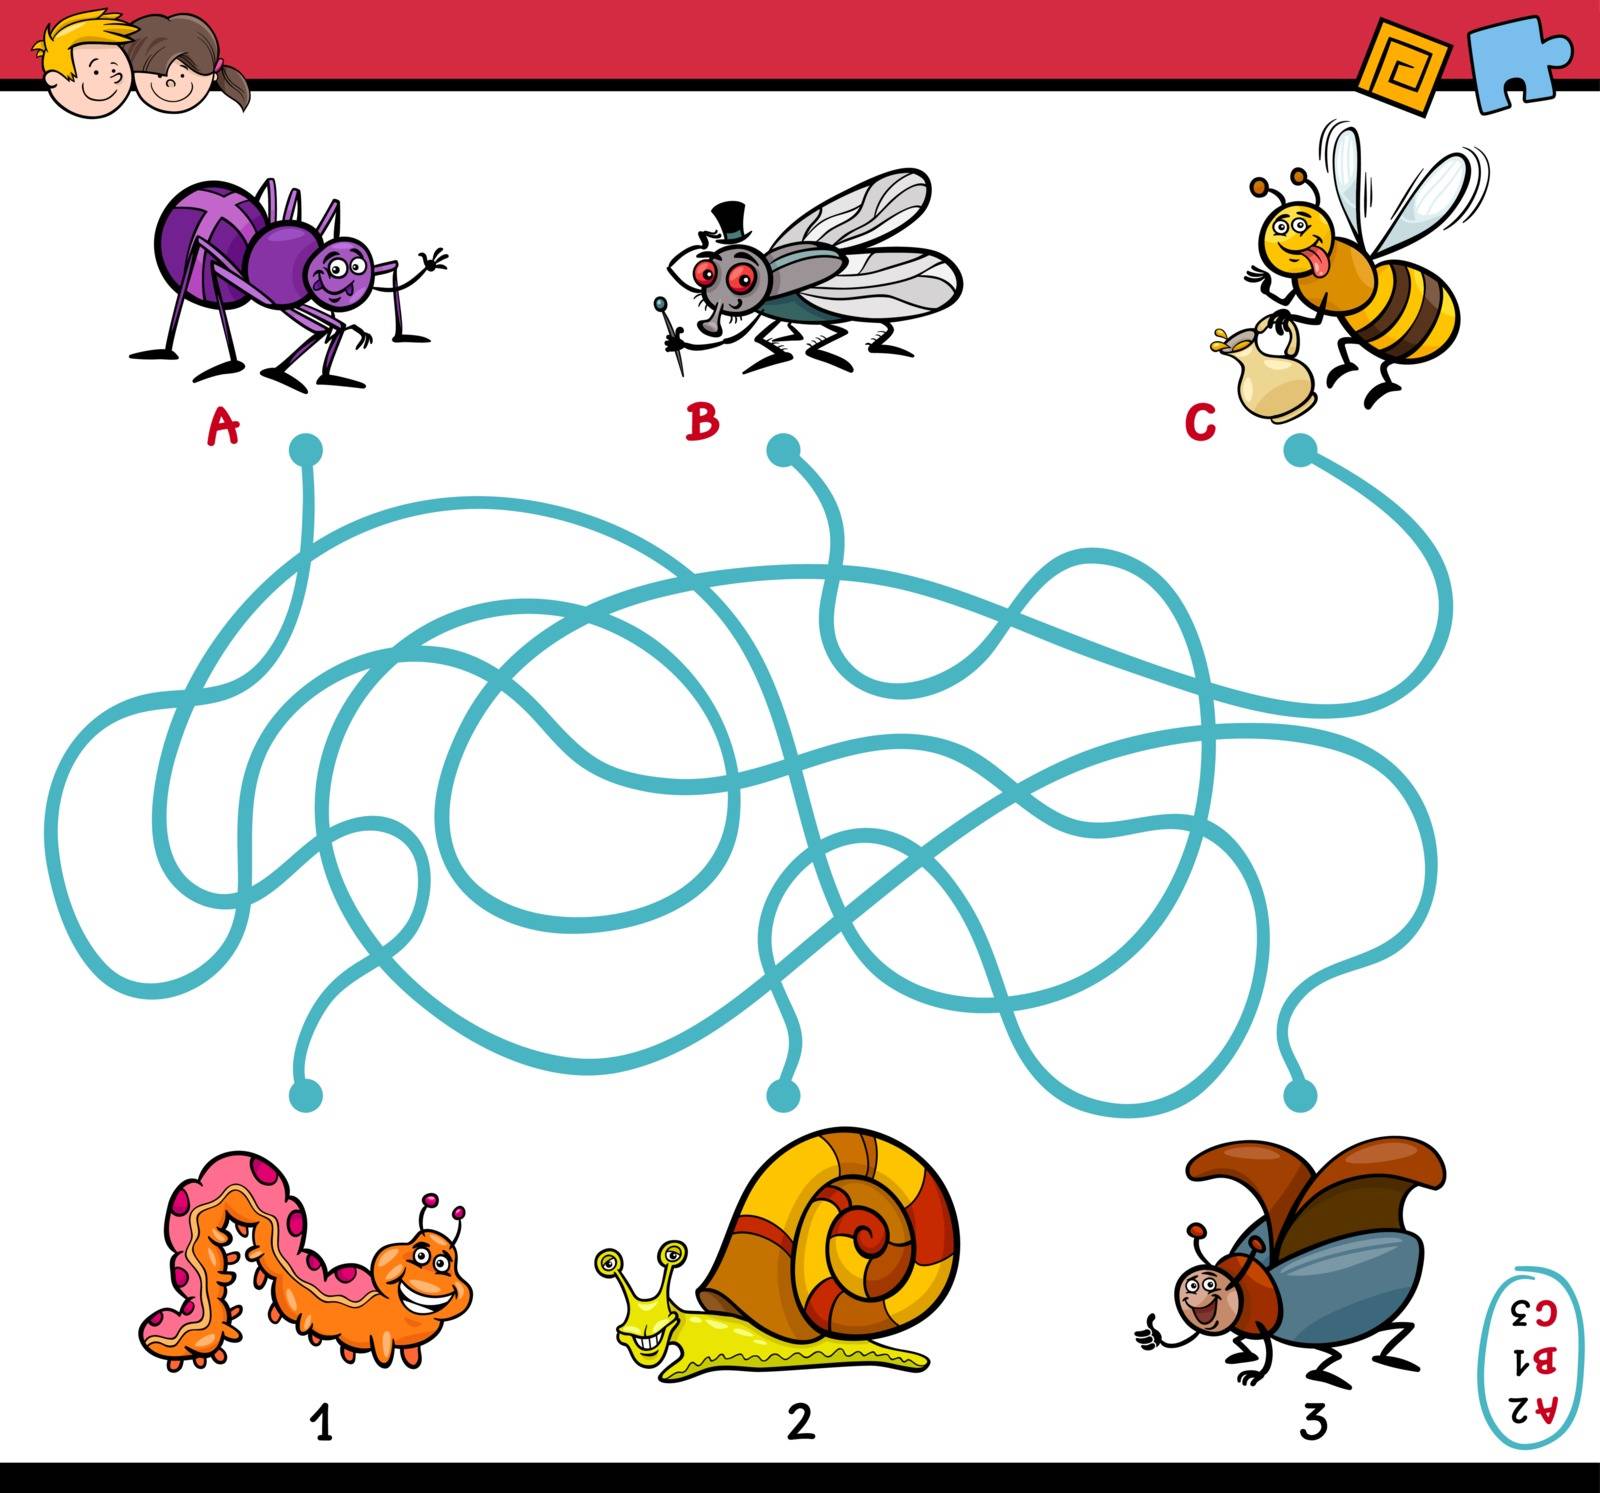 Cartoon Illustration of Educational Paths or Maze Puzzle Task for Preschool Children with Insect Characters